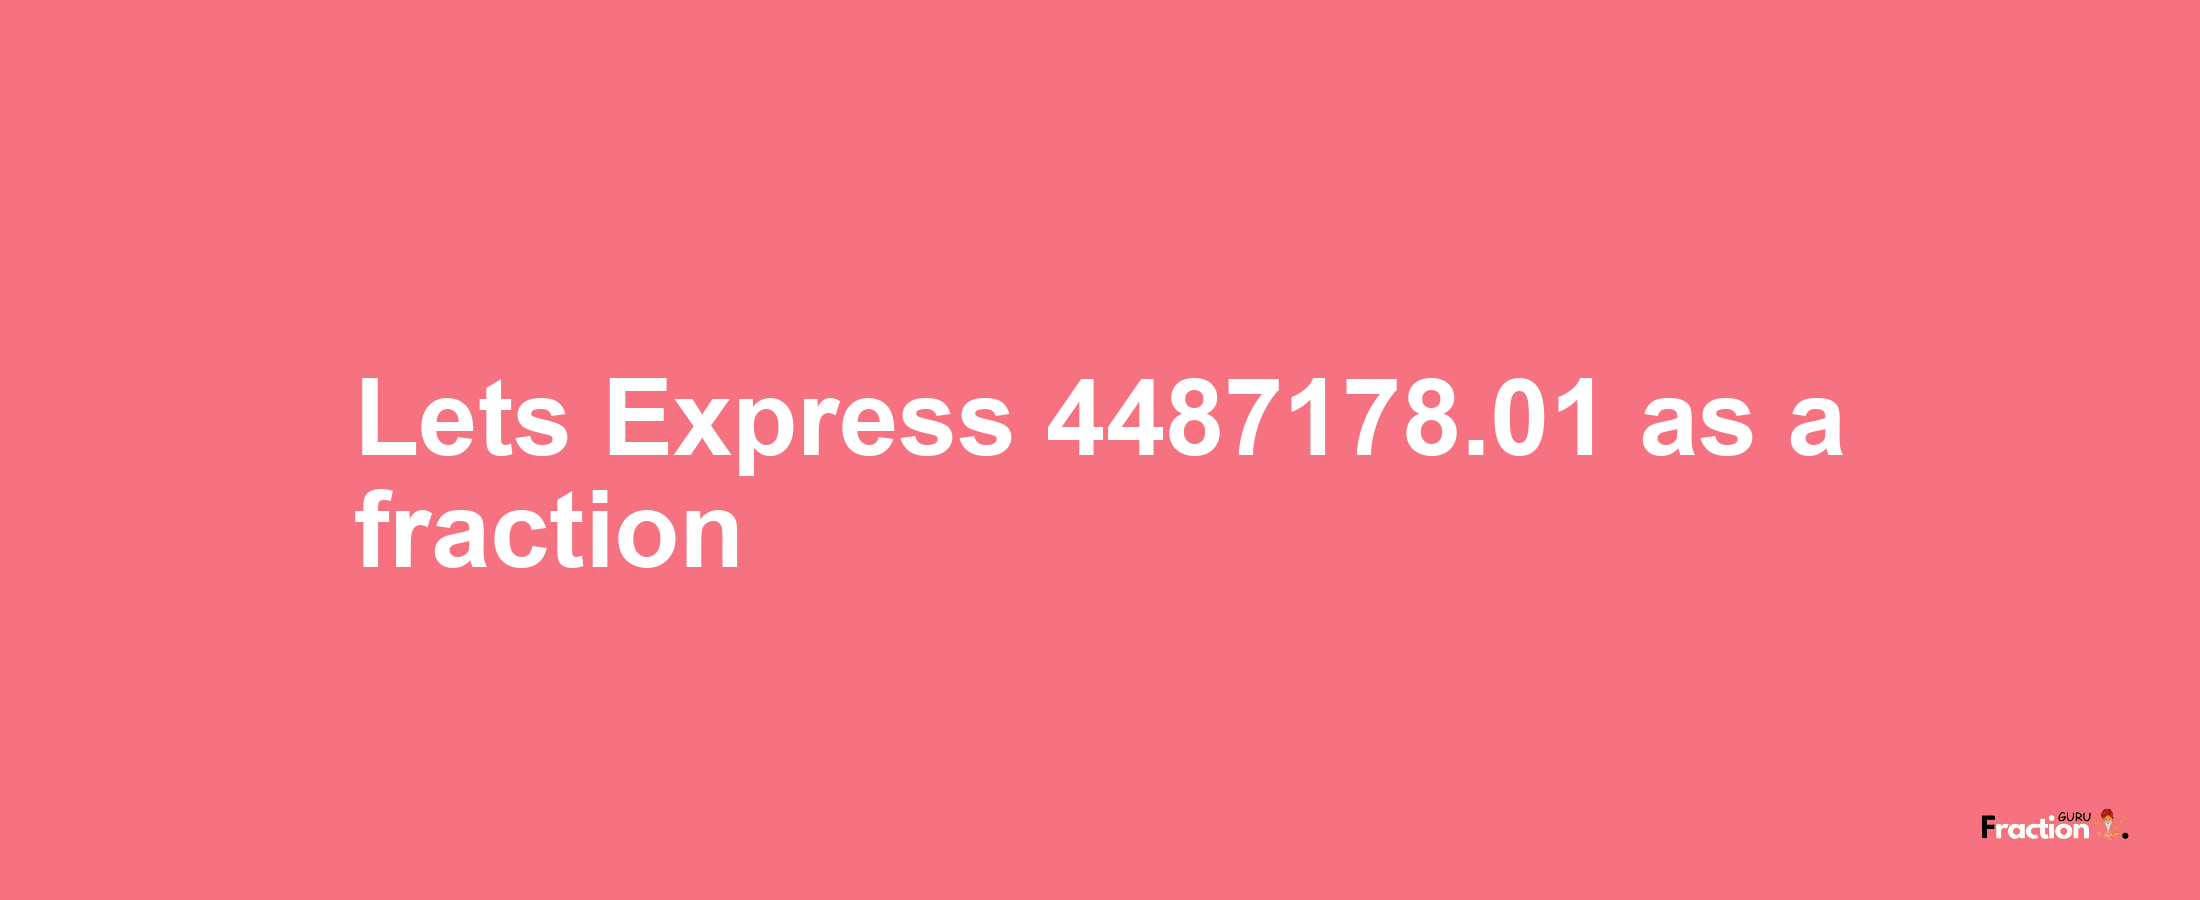 Lets Express 4487178.01 as afraction